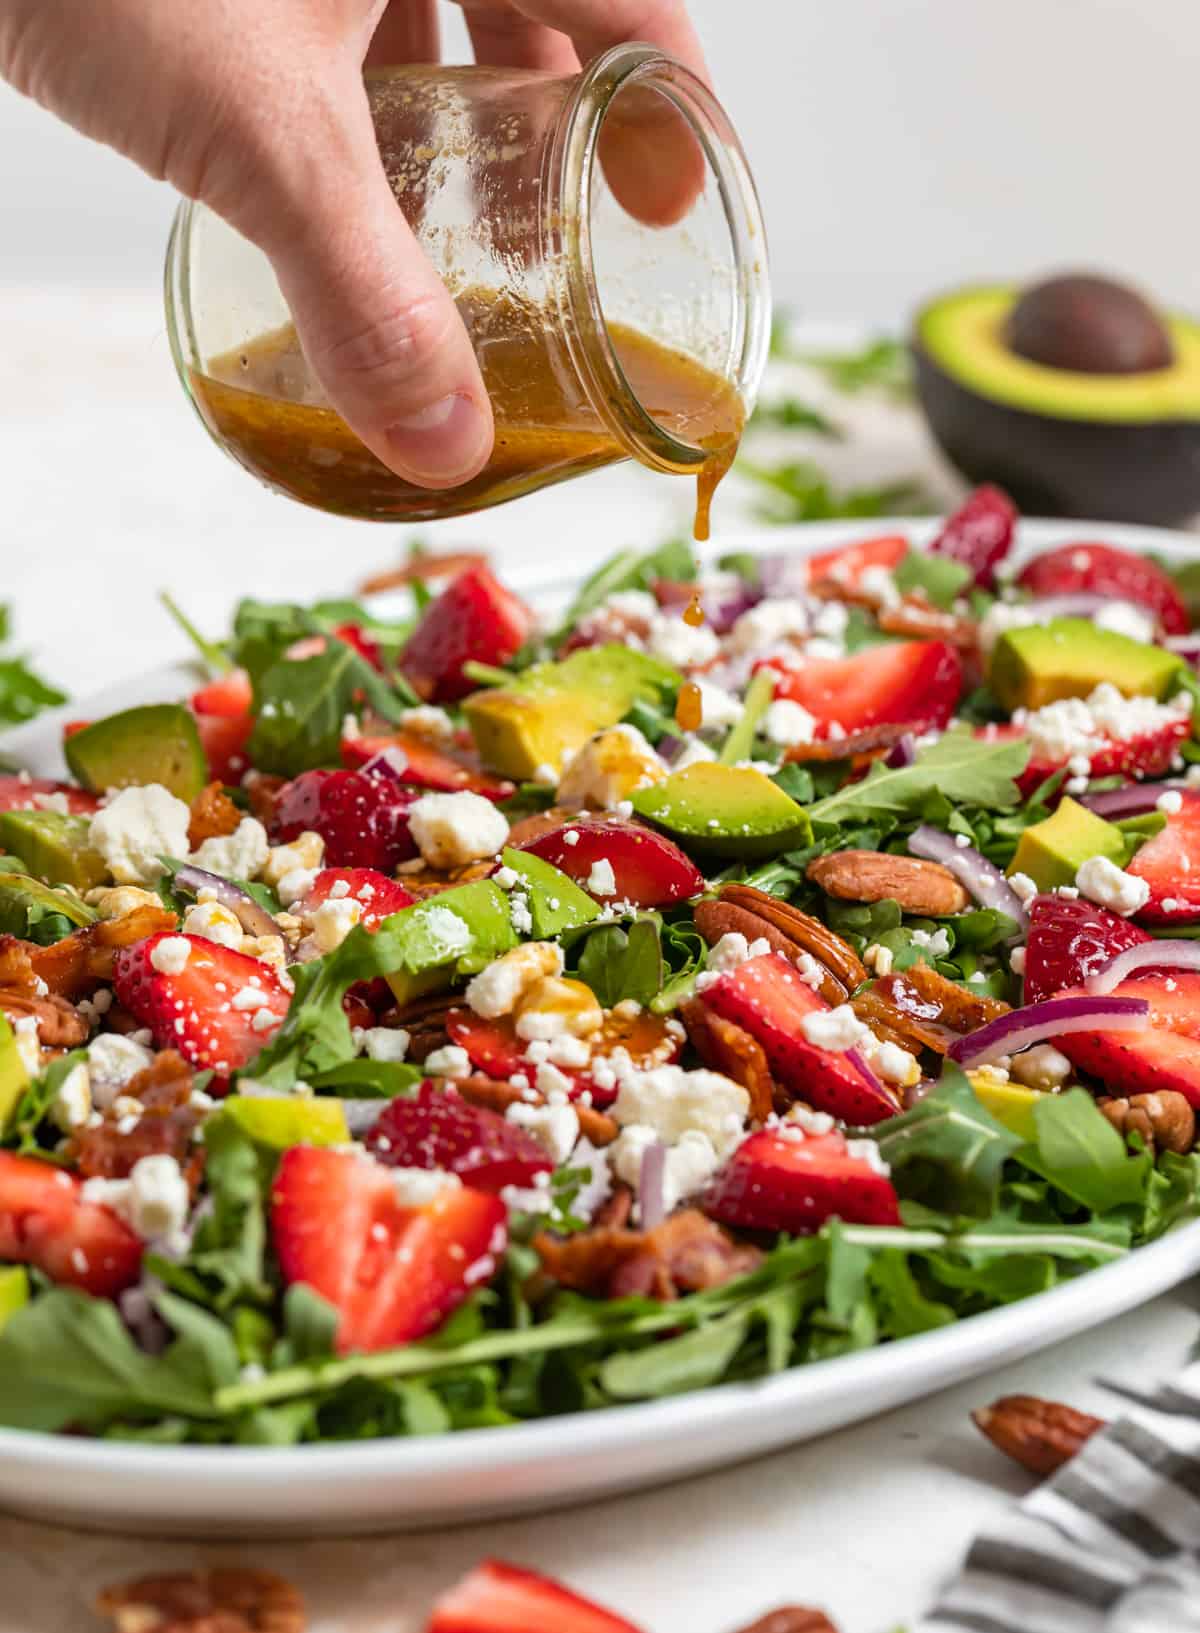 Balsamic dressing being poured over strawberry goat cheese salad on white plate.